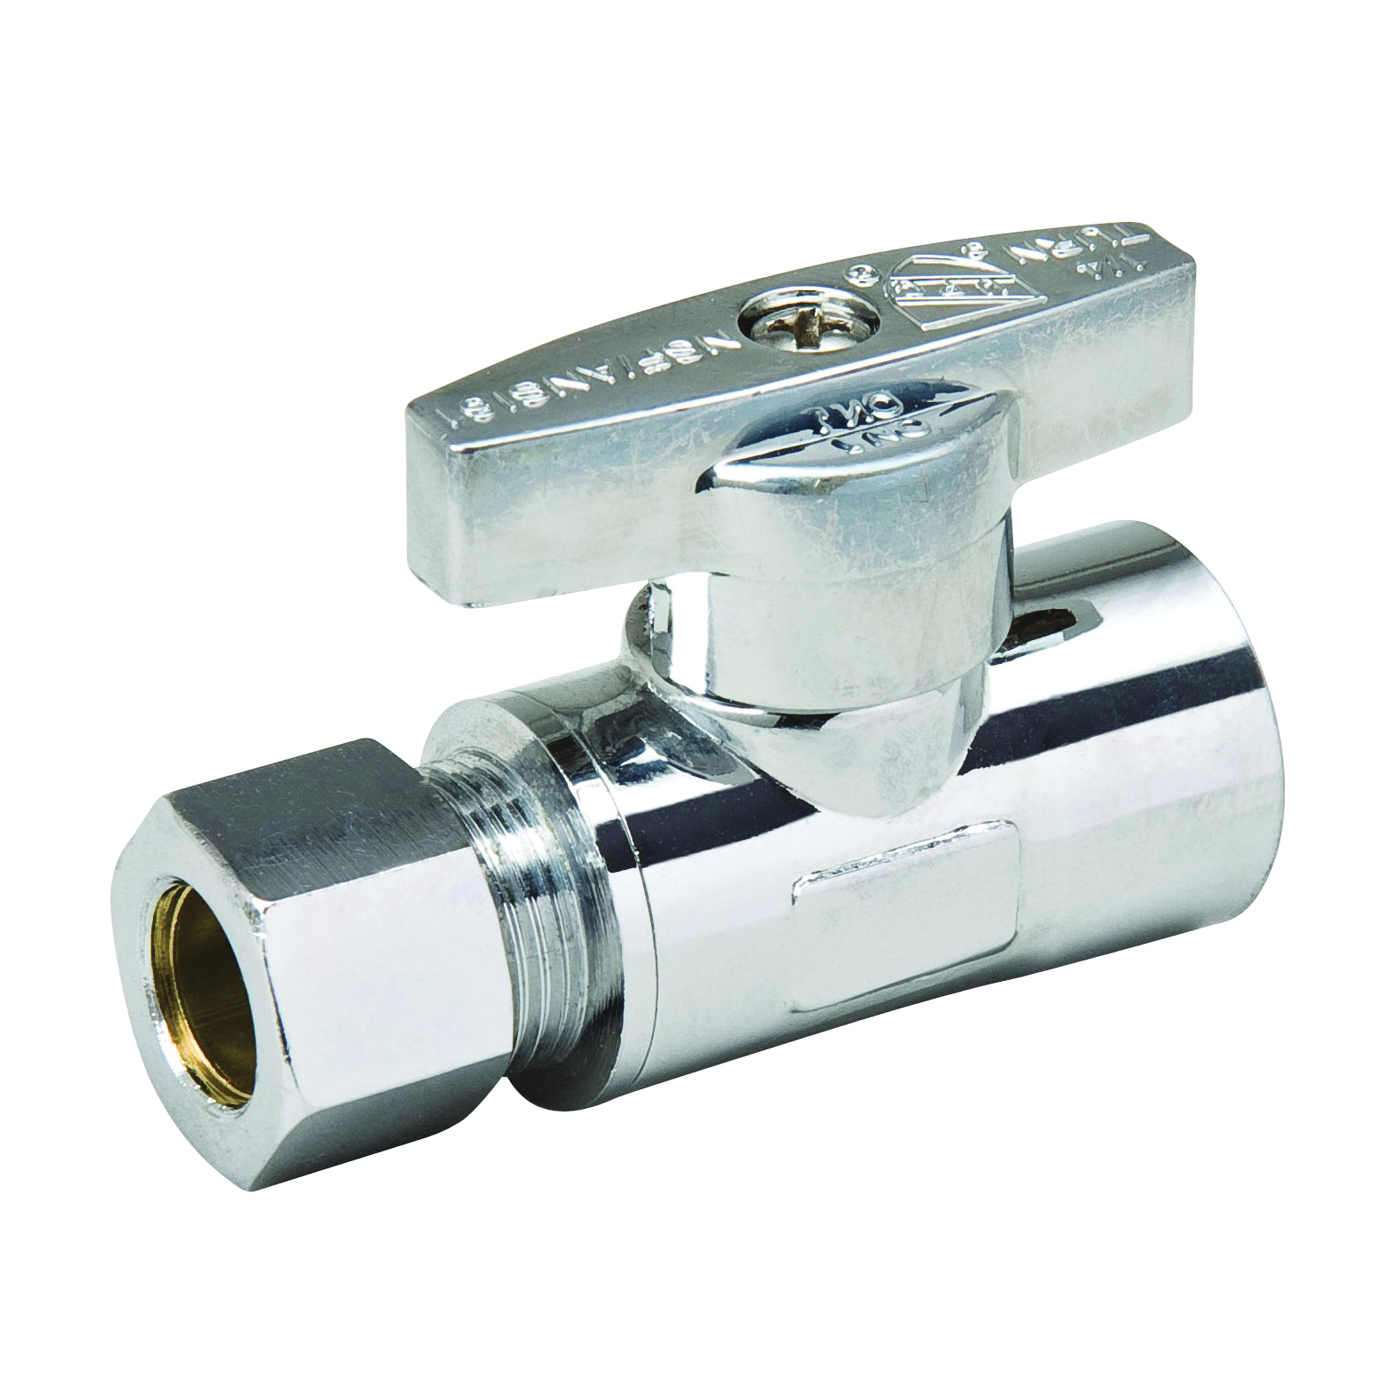 191-432HC Supply Line Stop Valve, 1/2 x 3/8 in Connection, Sweat x Compression, 125 psi Pressure, Brass Body